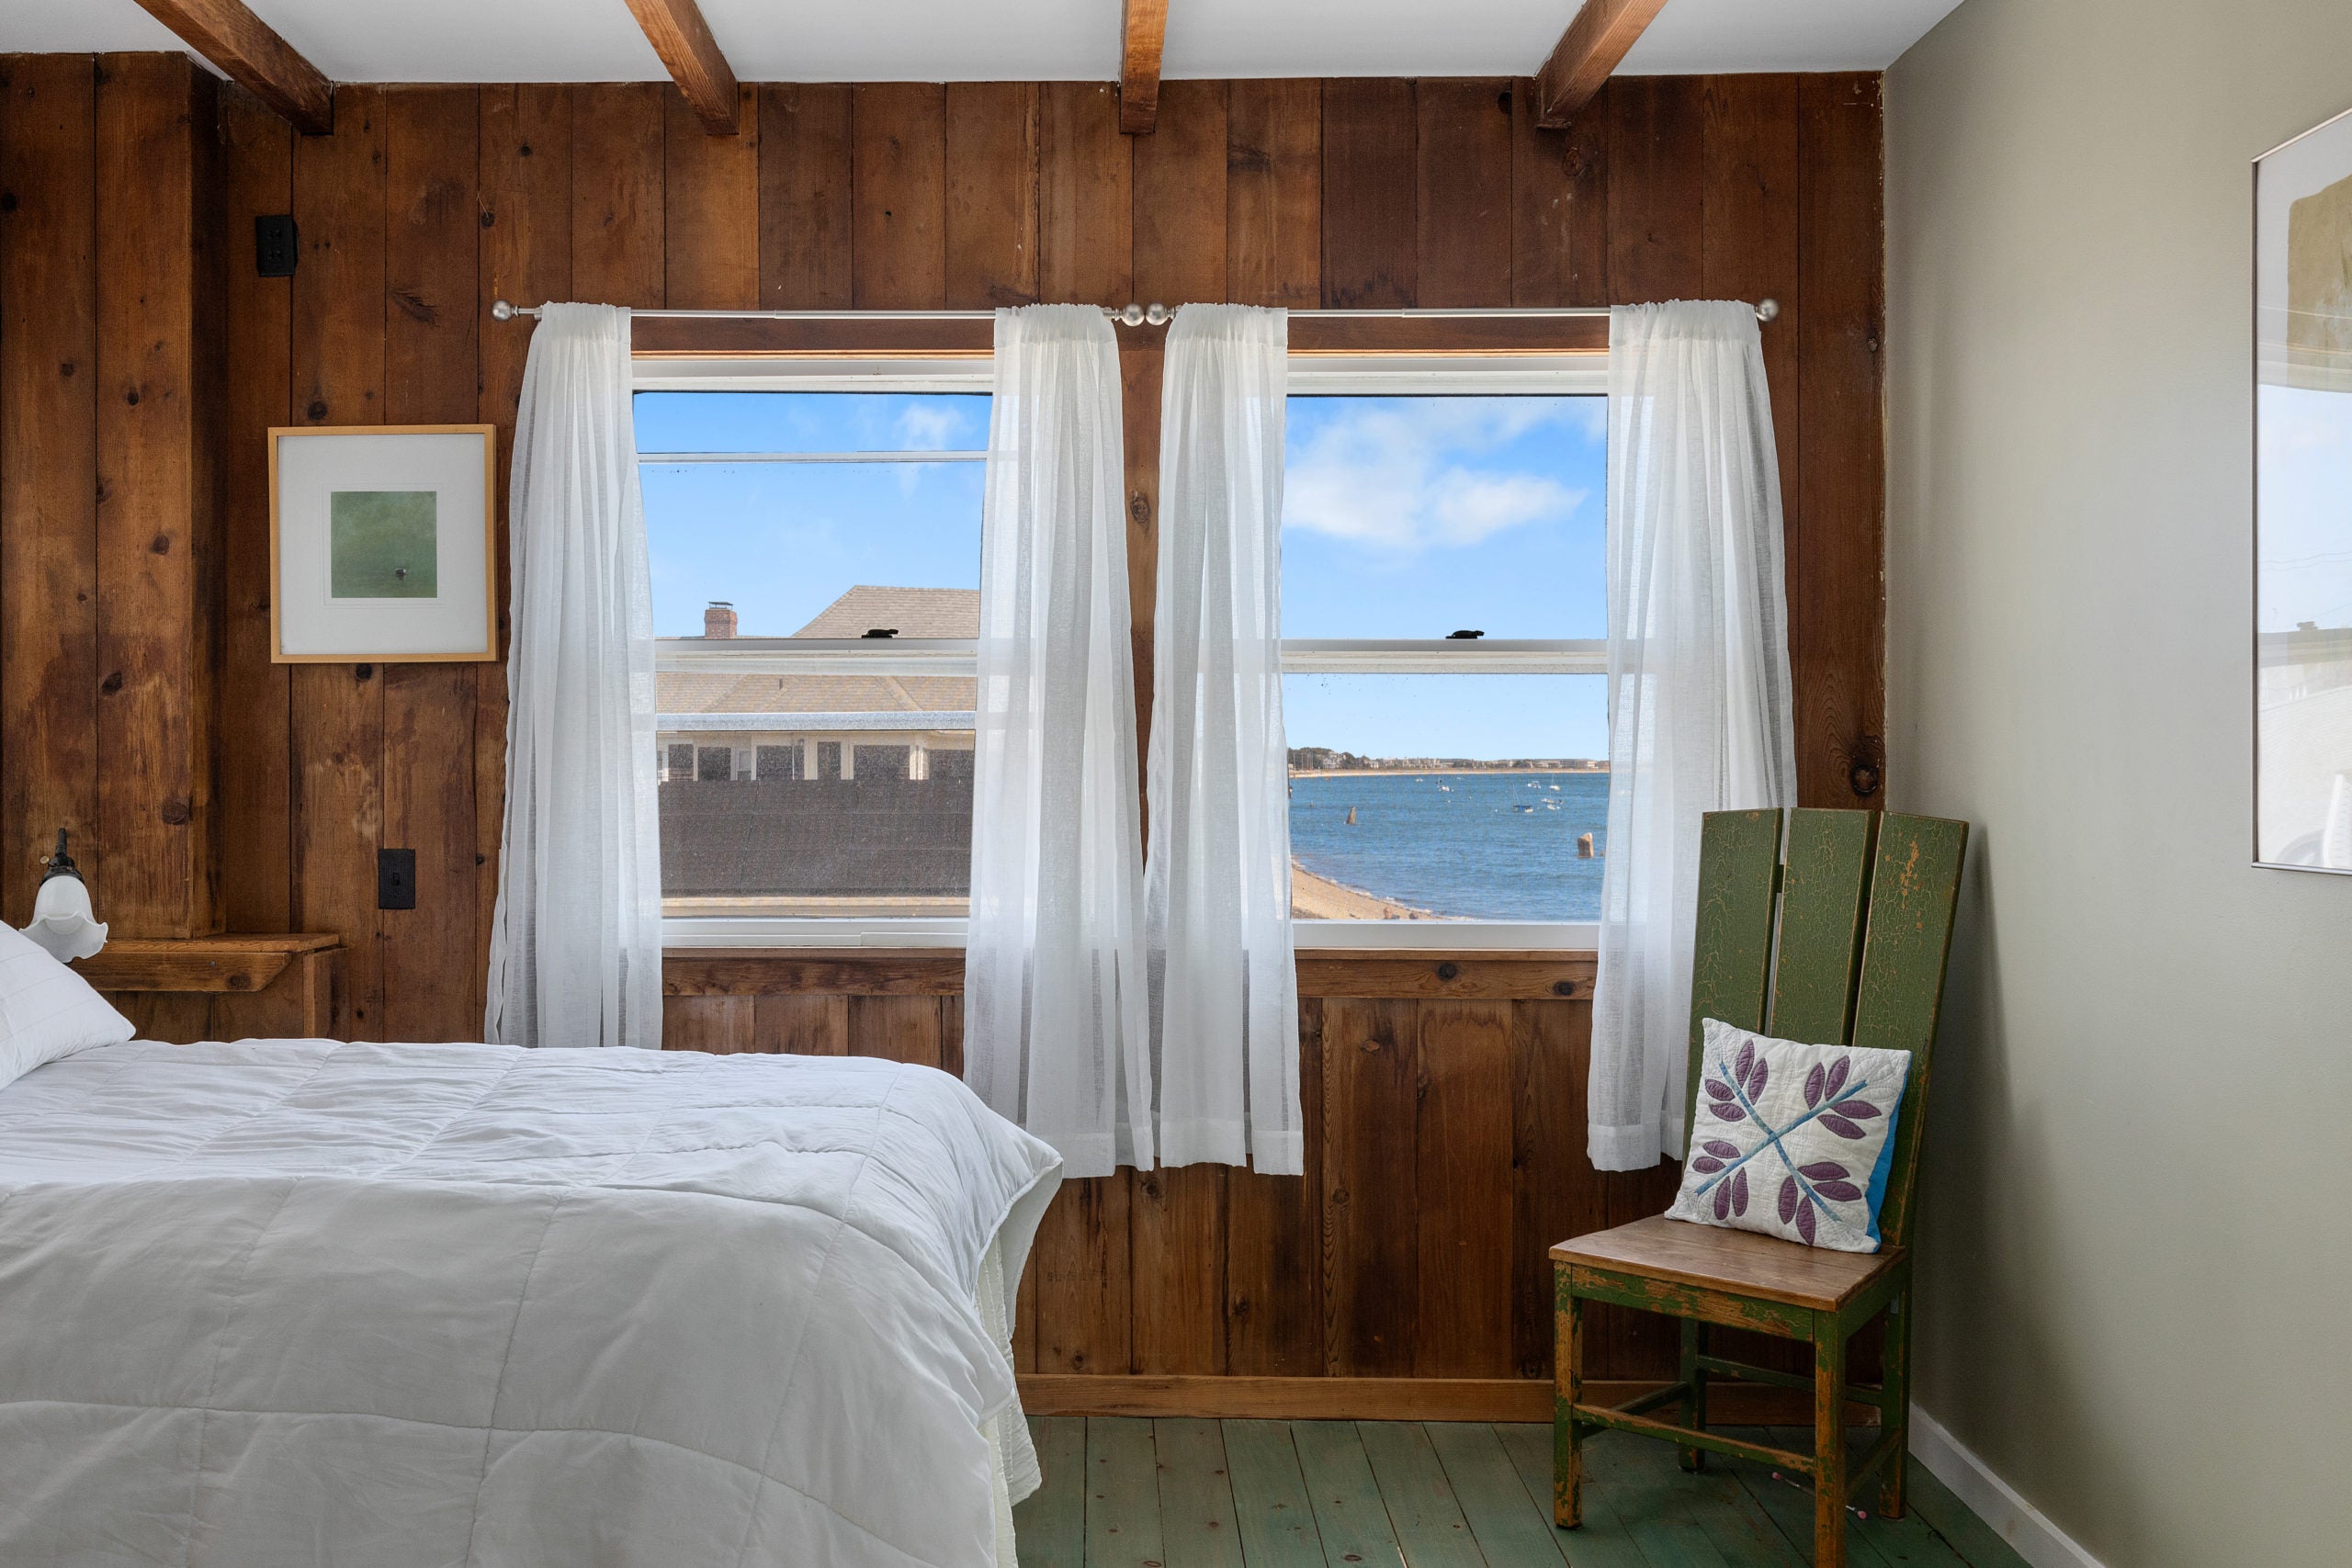 505-Commercial-St-Provincetown-Bedroom-2